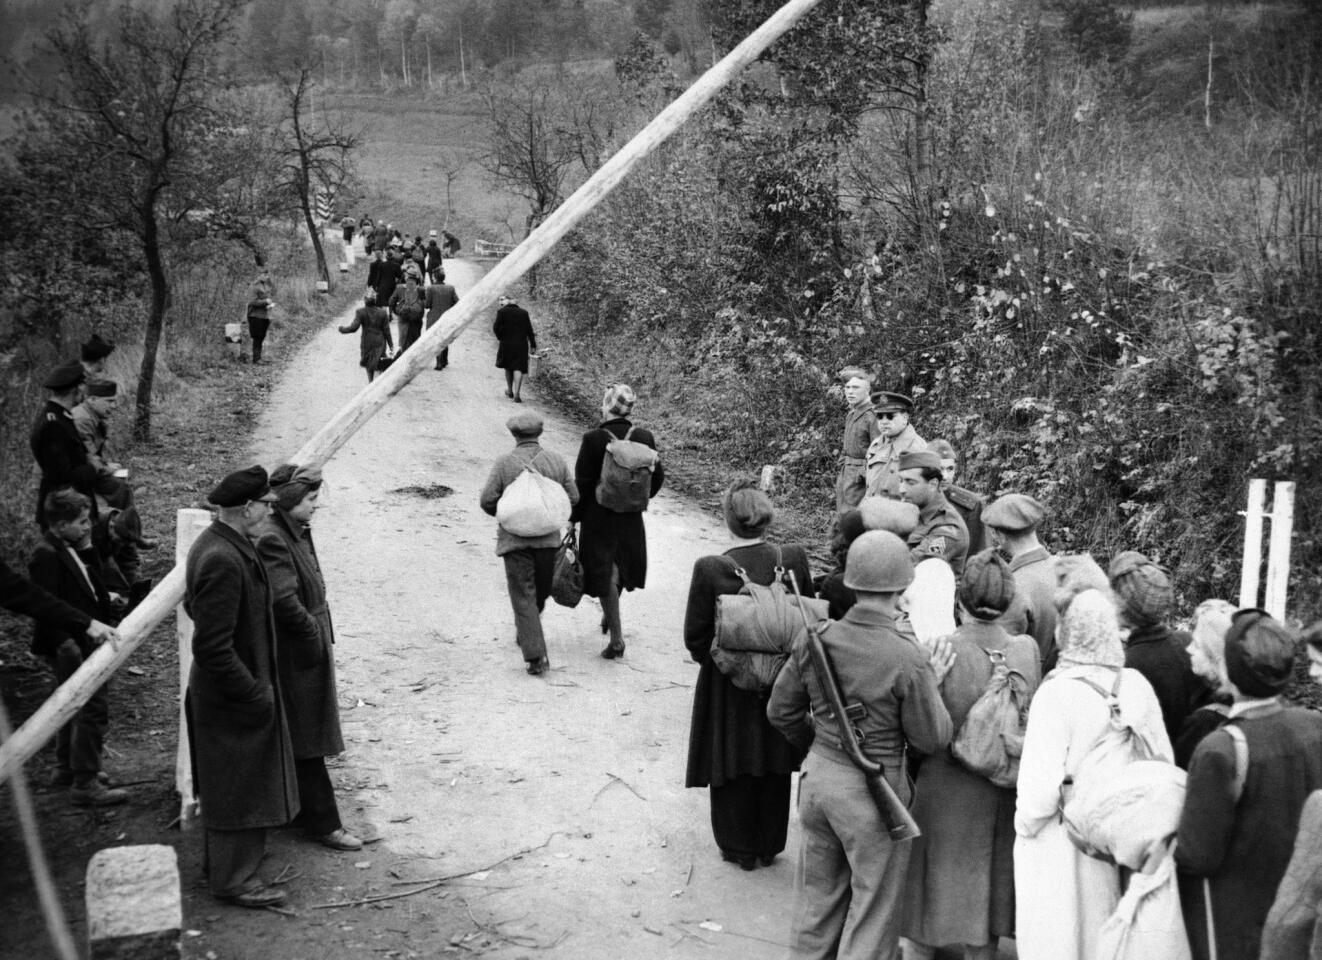 Looking back | The refugee crisis during World War II